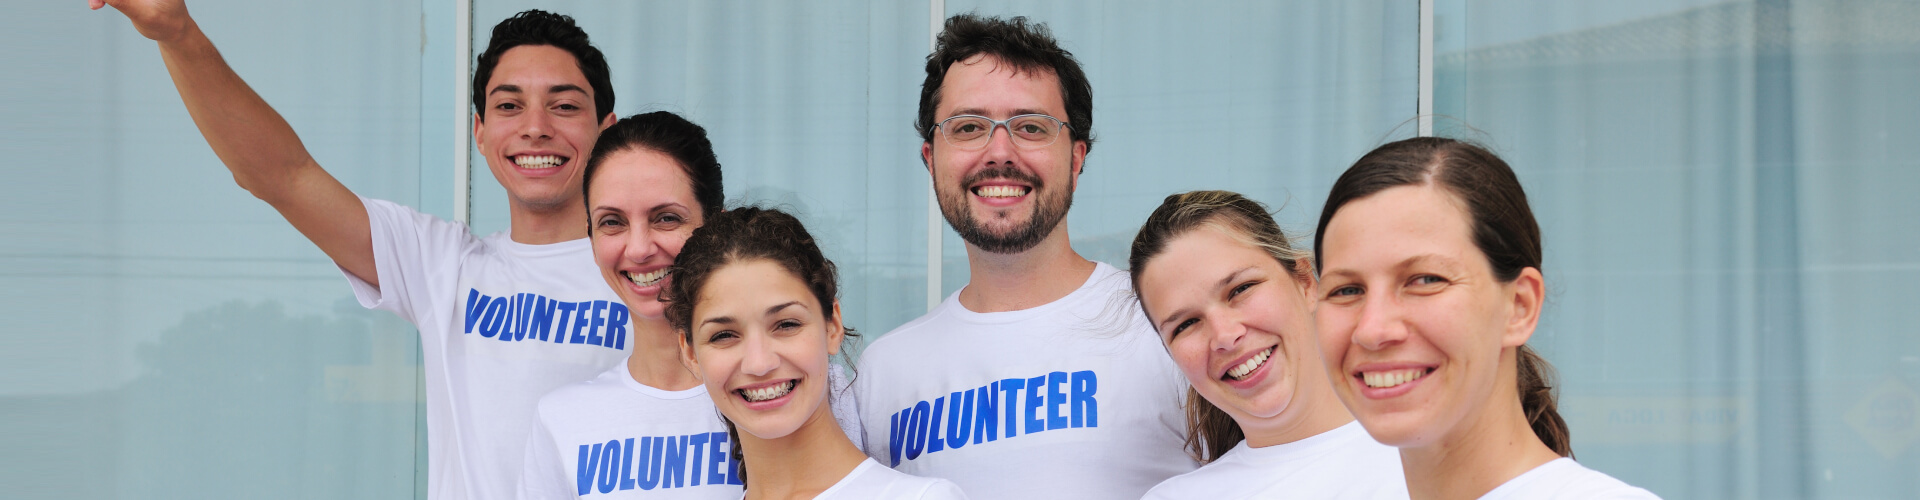 volunteers smiling for the camera